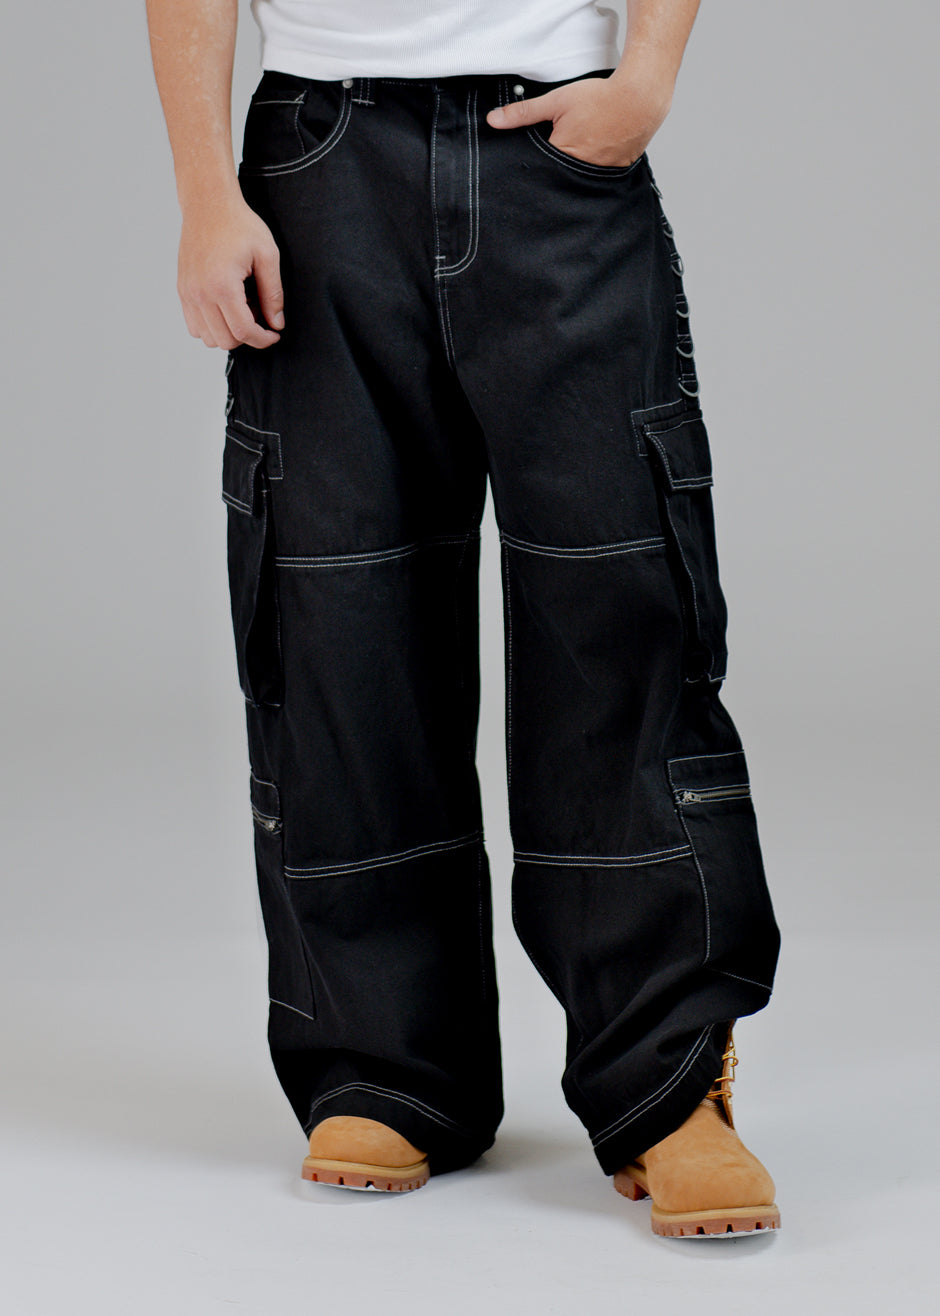 Monaghan Utility Jeans - Rinse